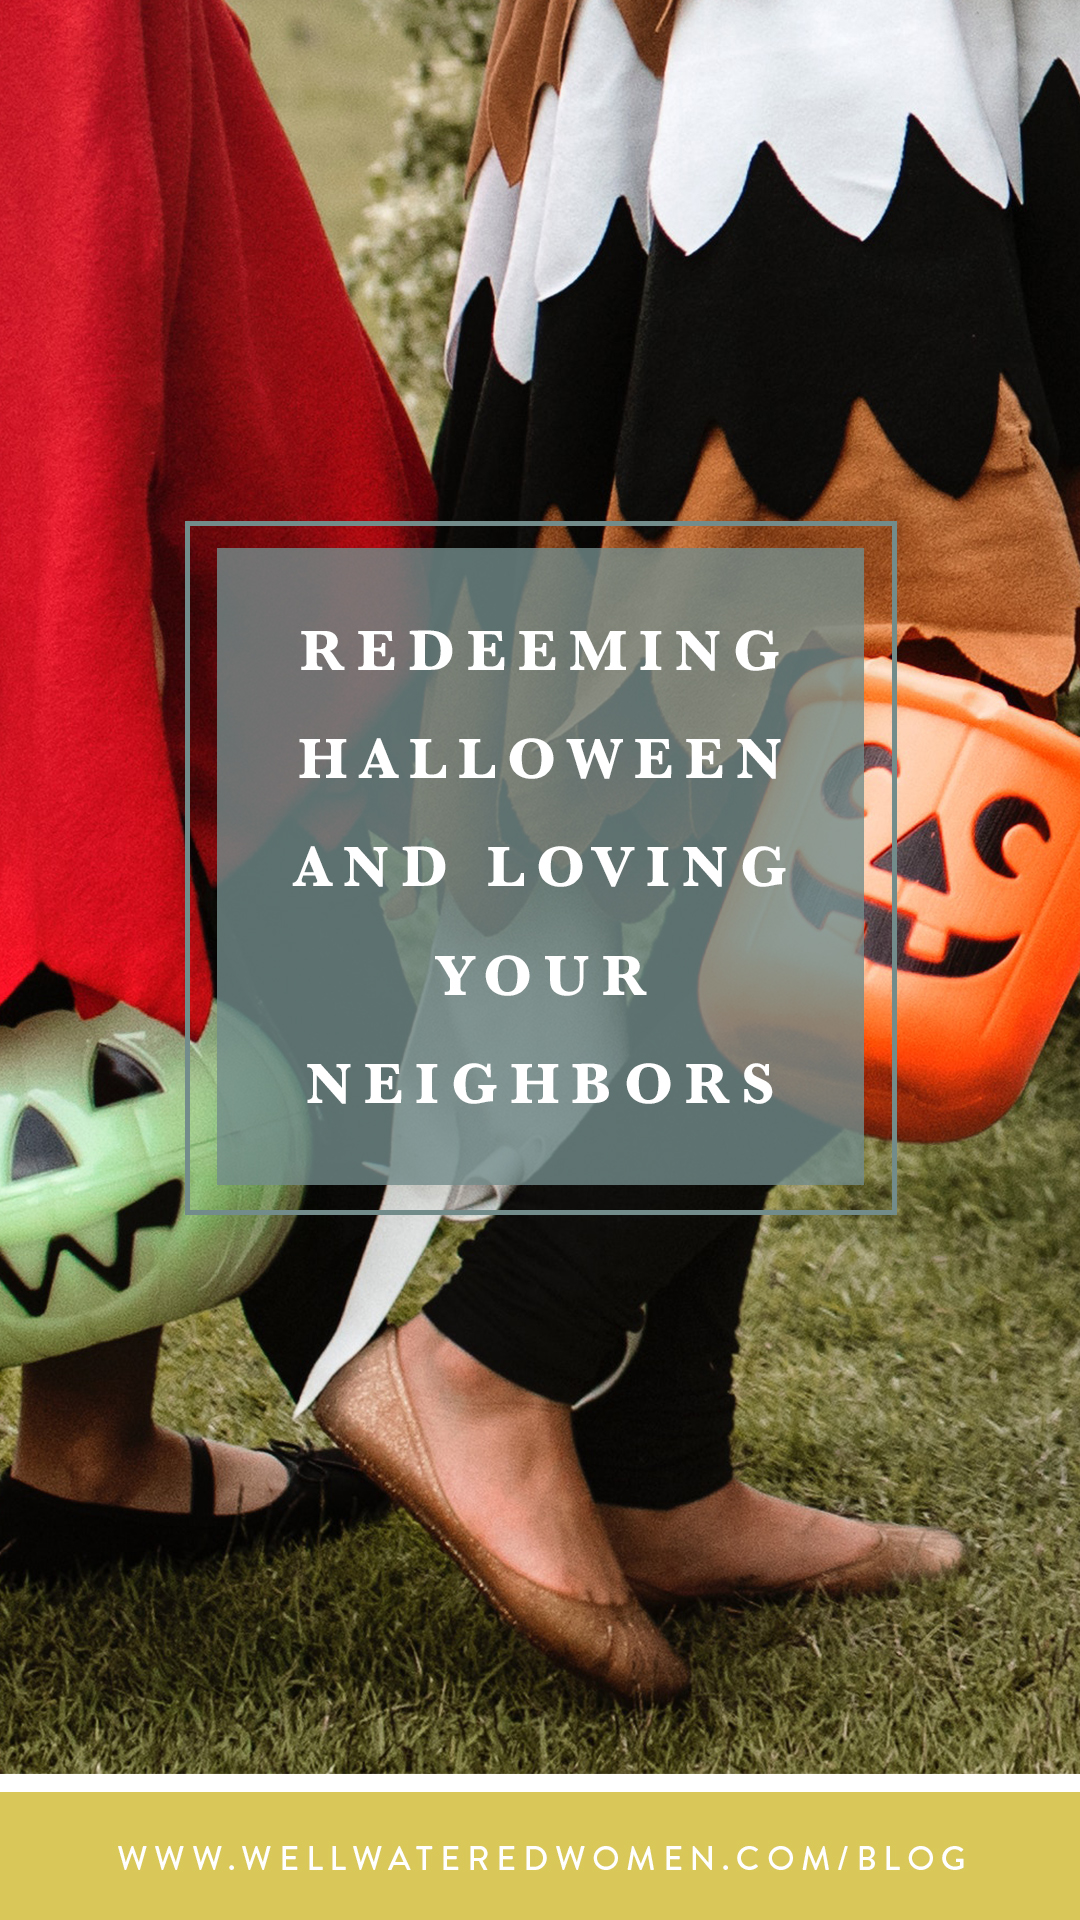 Redeeming Halloween & Loving Your Neighbors: When we choose to instead close our doors and turn off the lights, we miss the one night of the year where our neighbors are coming to us! How often do we invite people to church or to our home for a gathering only to be rejected? What a wonderful opportunity to say “yes!” on Halloween night when they come straight to our doors. This time of year is the beginning of cooler weather, festive gatherings, and togetherness. It offers us the opportunity to reach out to our neighbors and friends in creative ways.